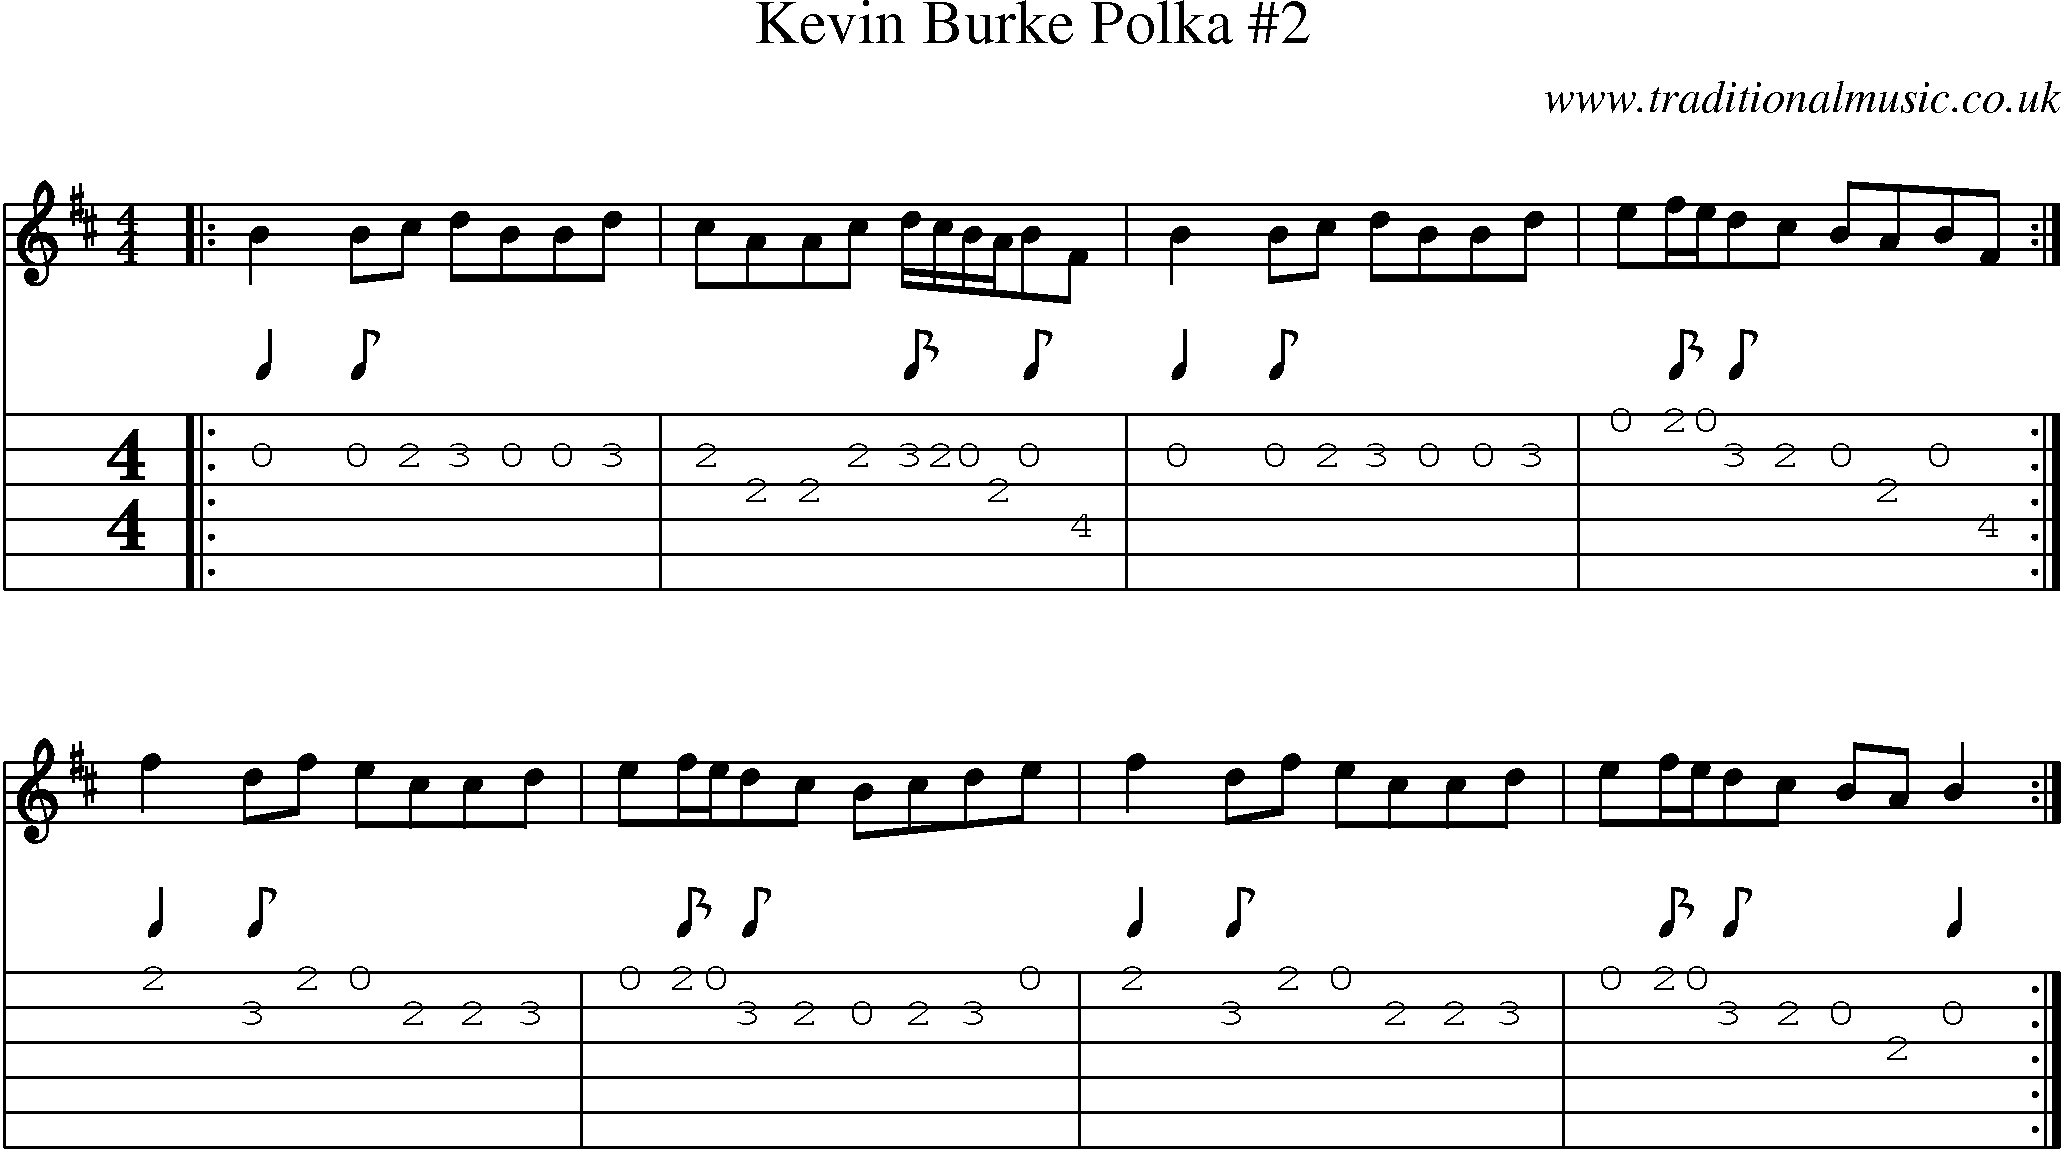 Music Score and Guitar Tabs for Kevin Burke Polka 2